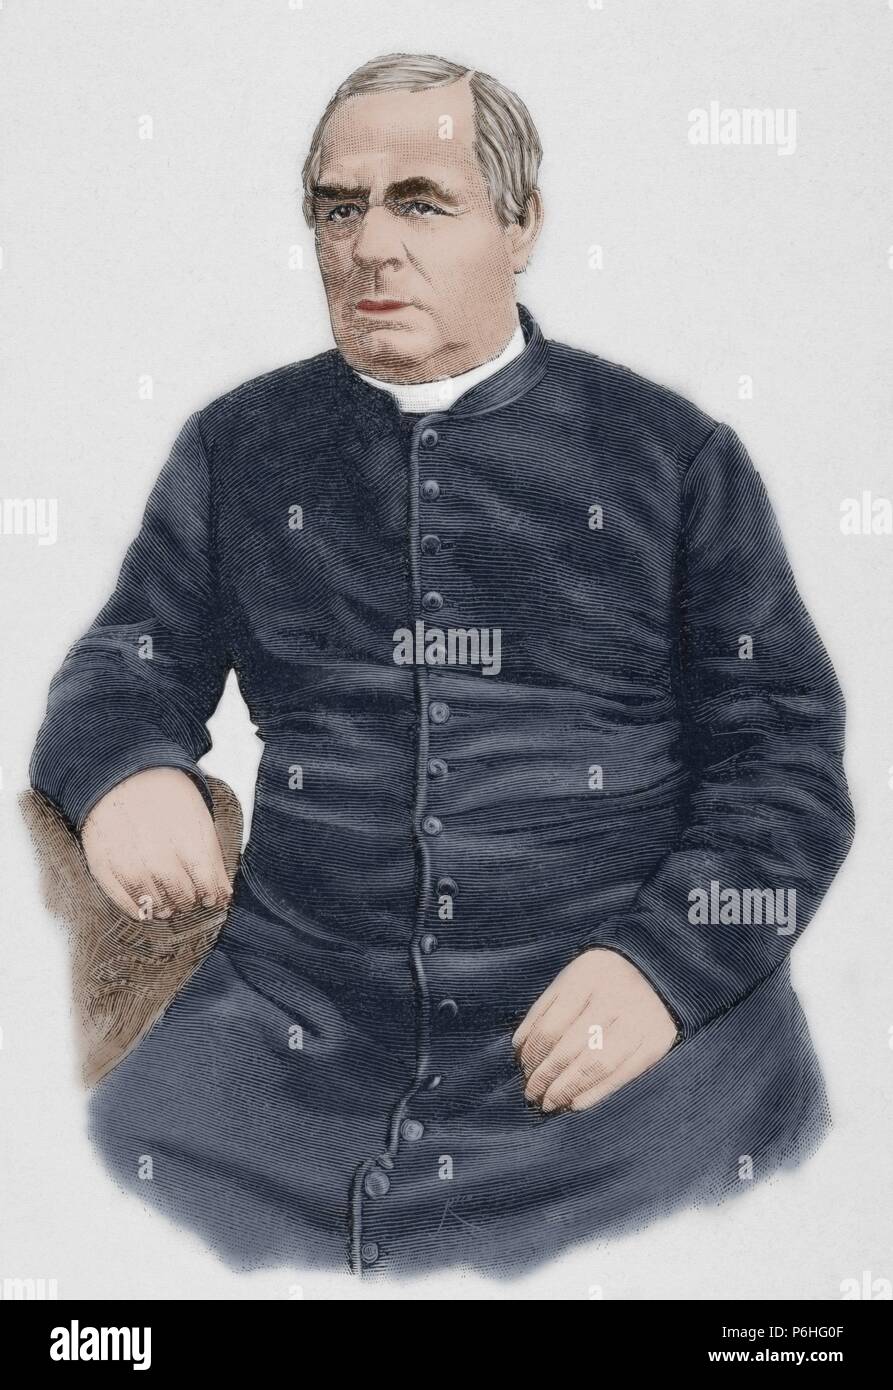 Sebastian Kneipp (1821-1897). German priest. Engraving by Rico. The Spanish and American Illustration, 1892. Colored. Stock Photo